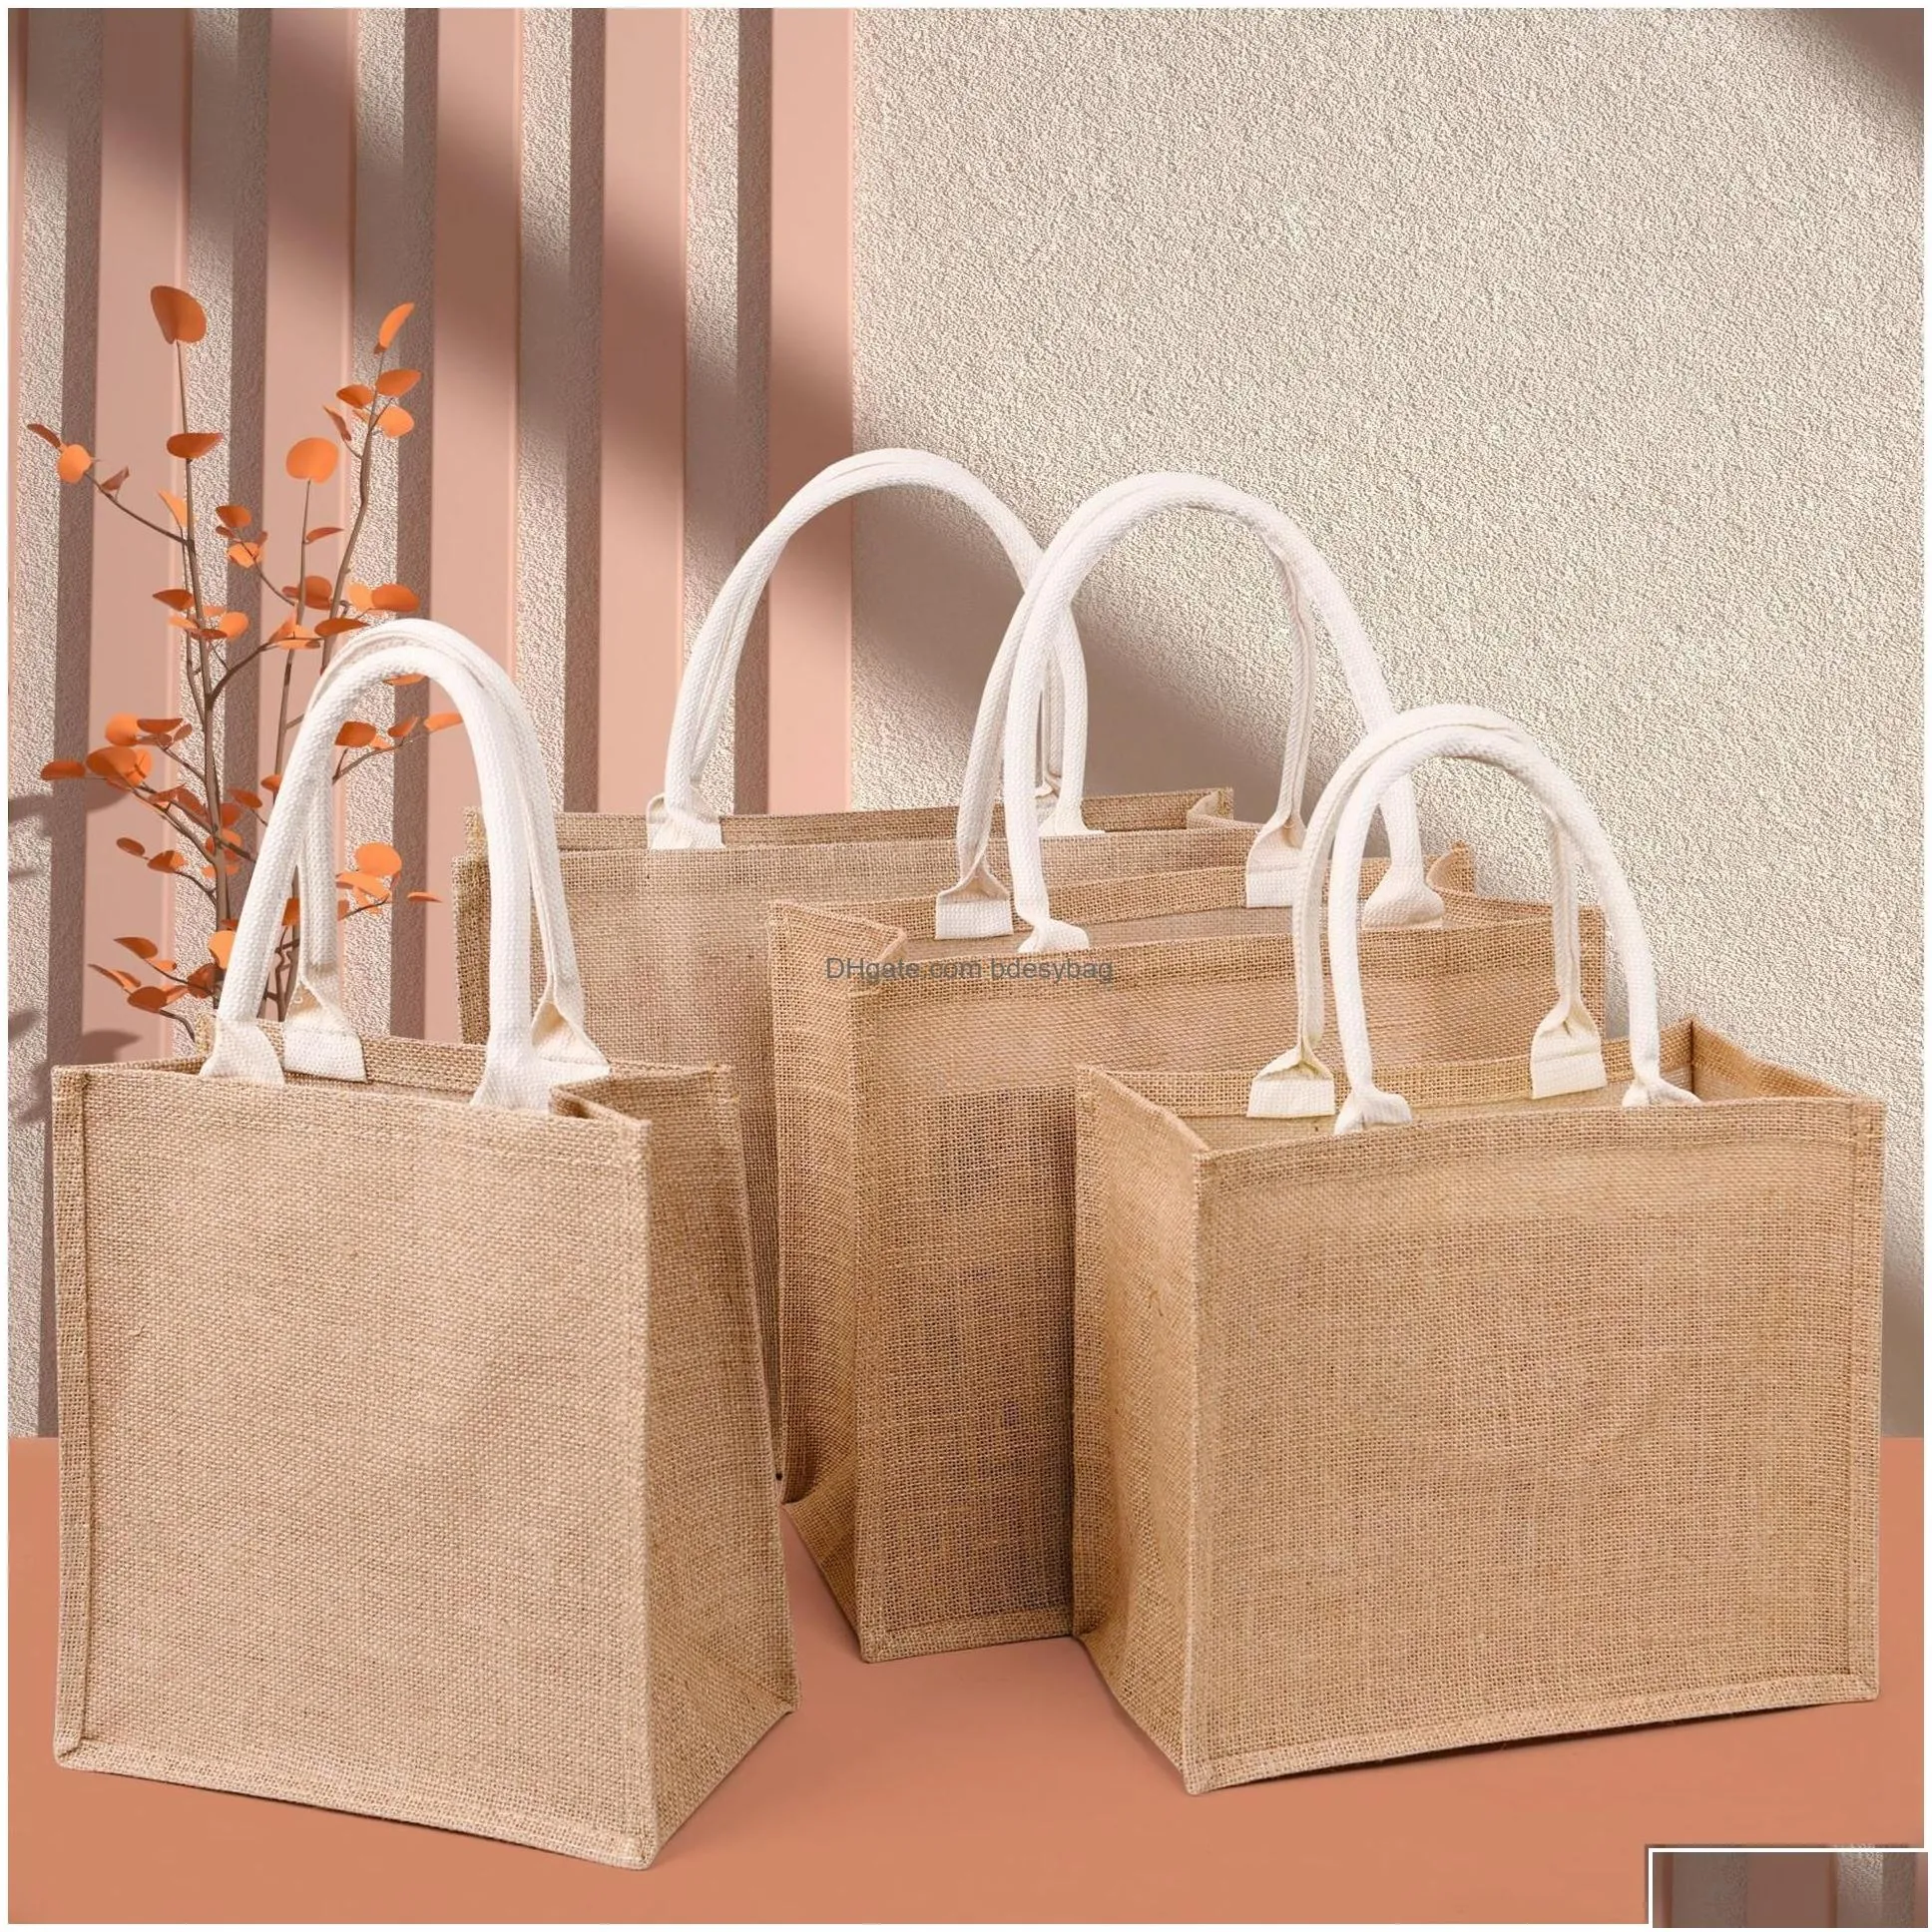 wholesale Sublimation Blanks Plain Natural Tote Bag Small Jute Bags For Diy Hand Painting Blank Polyester Canvas Totes With Handles